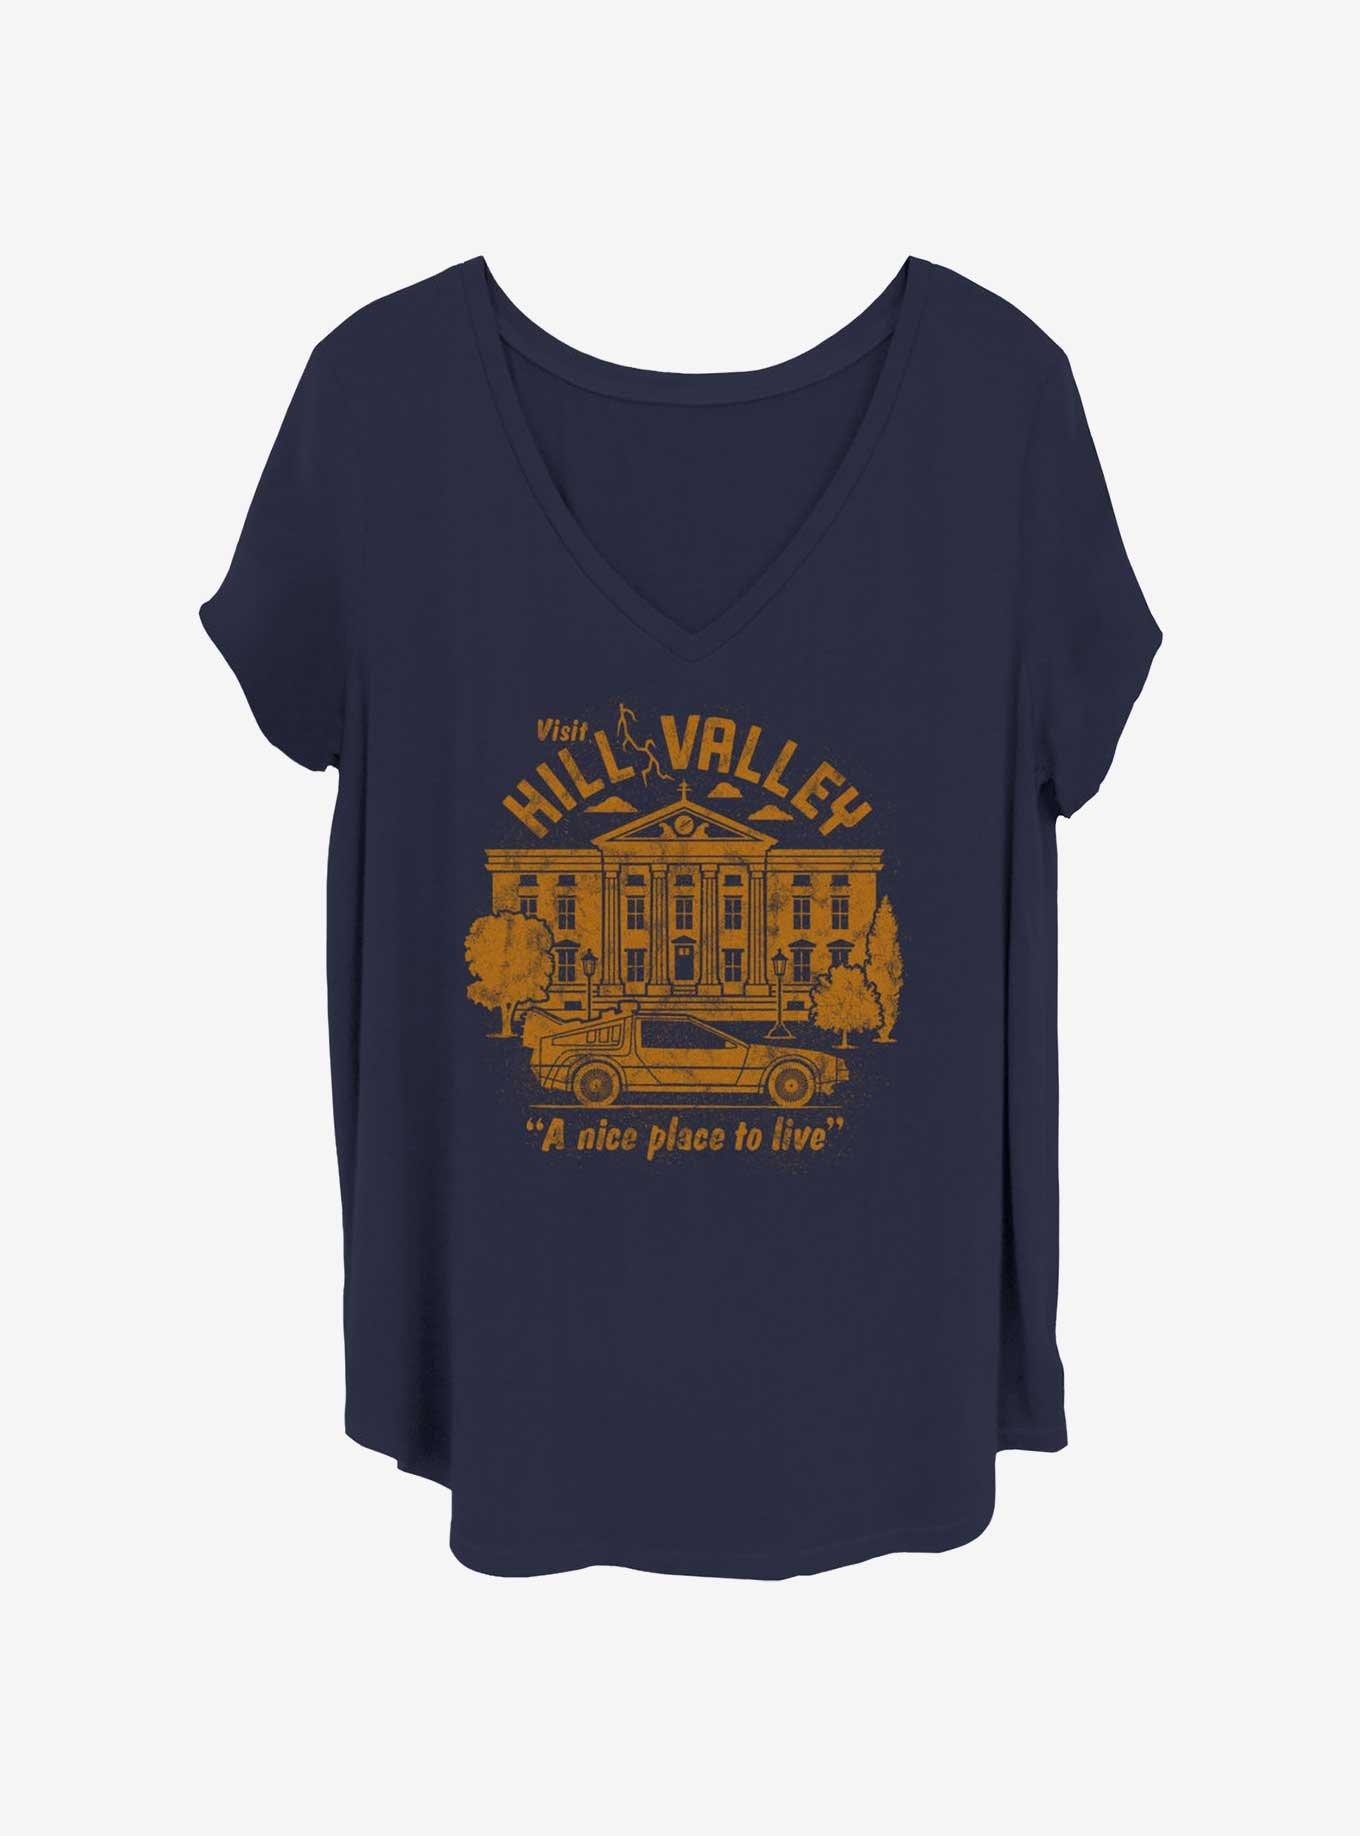 Back to the Future Visit Hill Valley Girls T-Shirt Plus